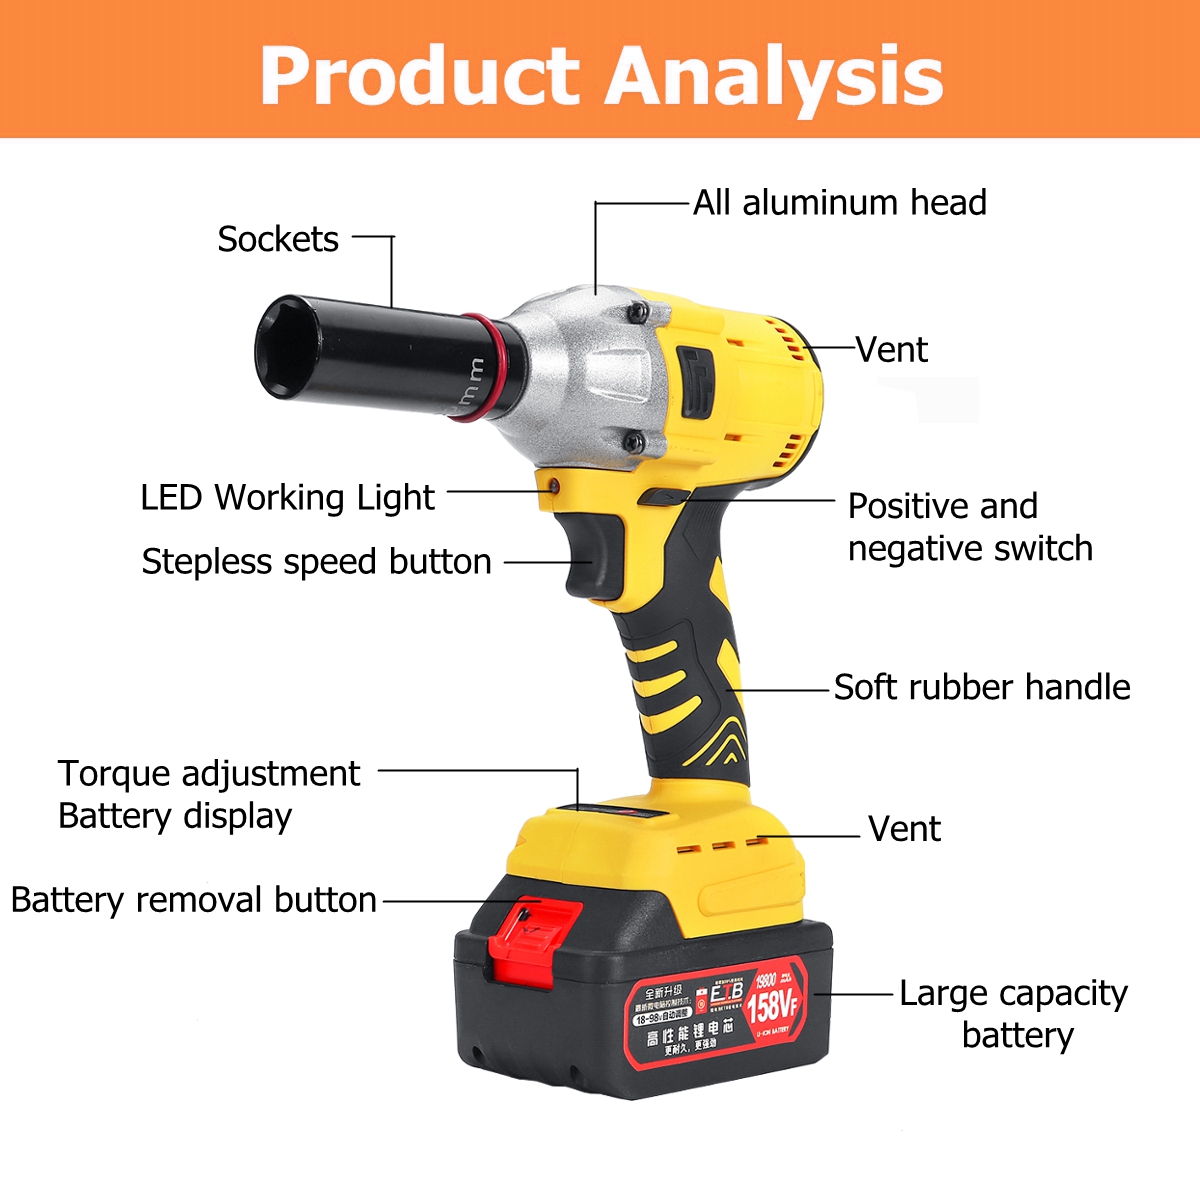 158VF-19800mAh-Cordless-Brushless-Impact-Wrench-Power-Driver-Electric-Wrench-Socket-Battery-Hand-Dri-1545779-9